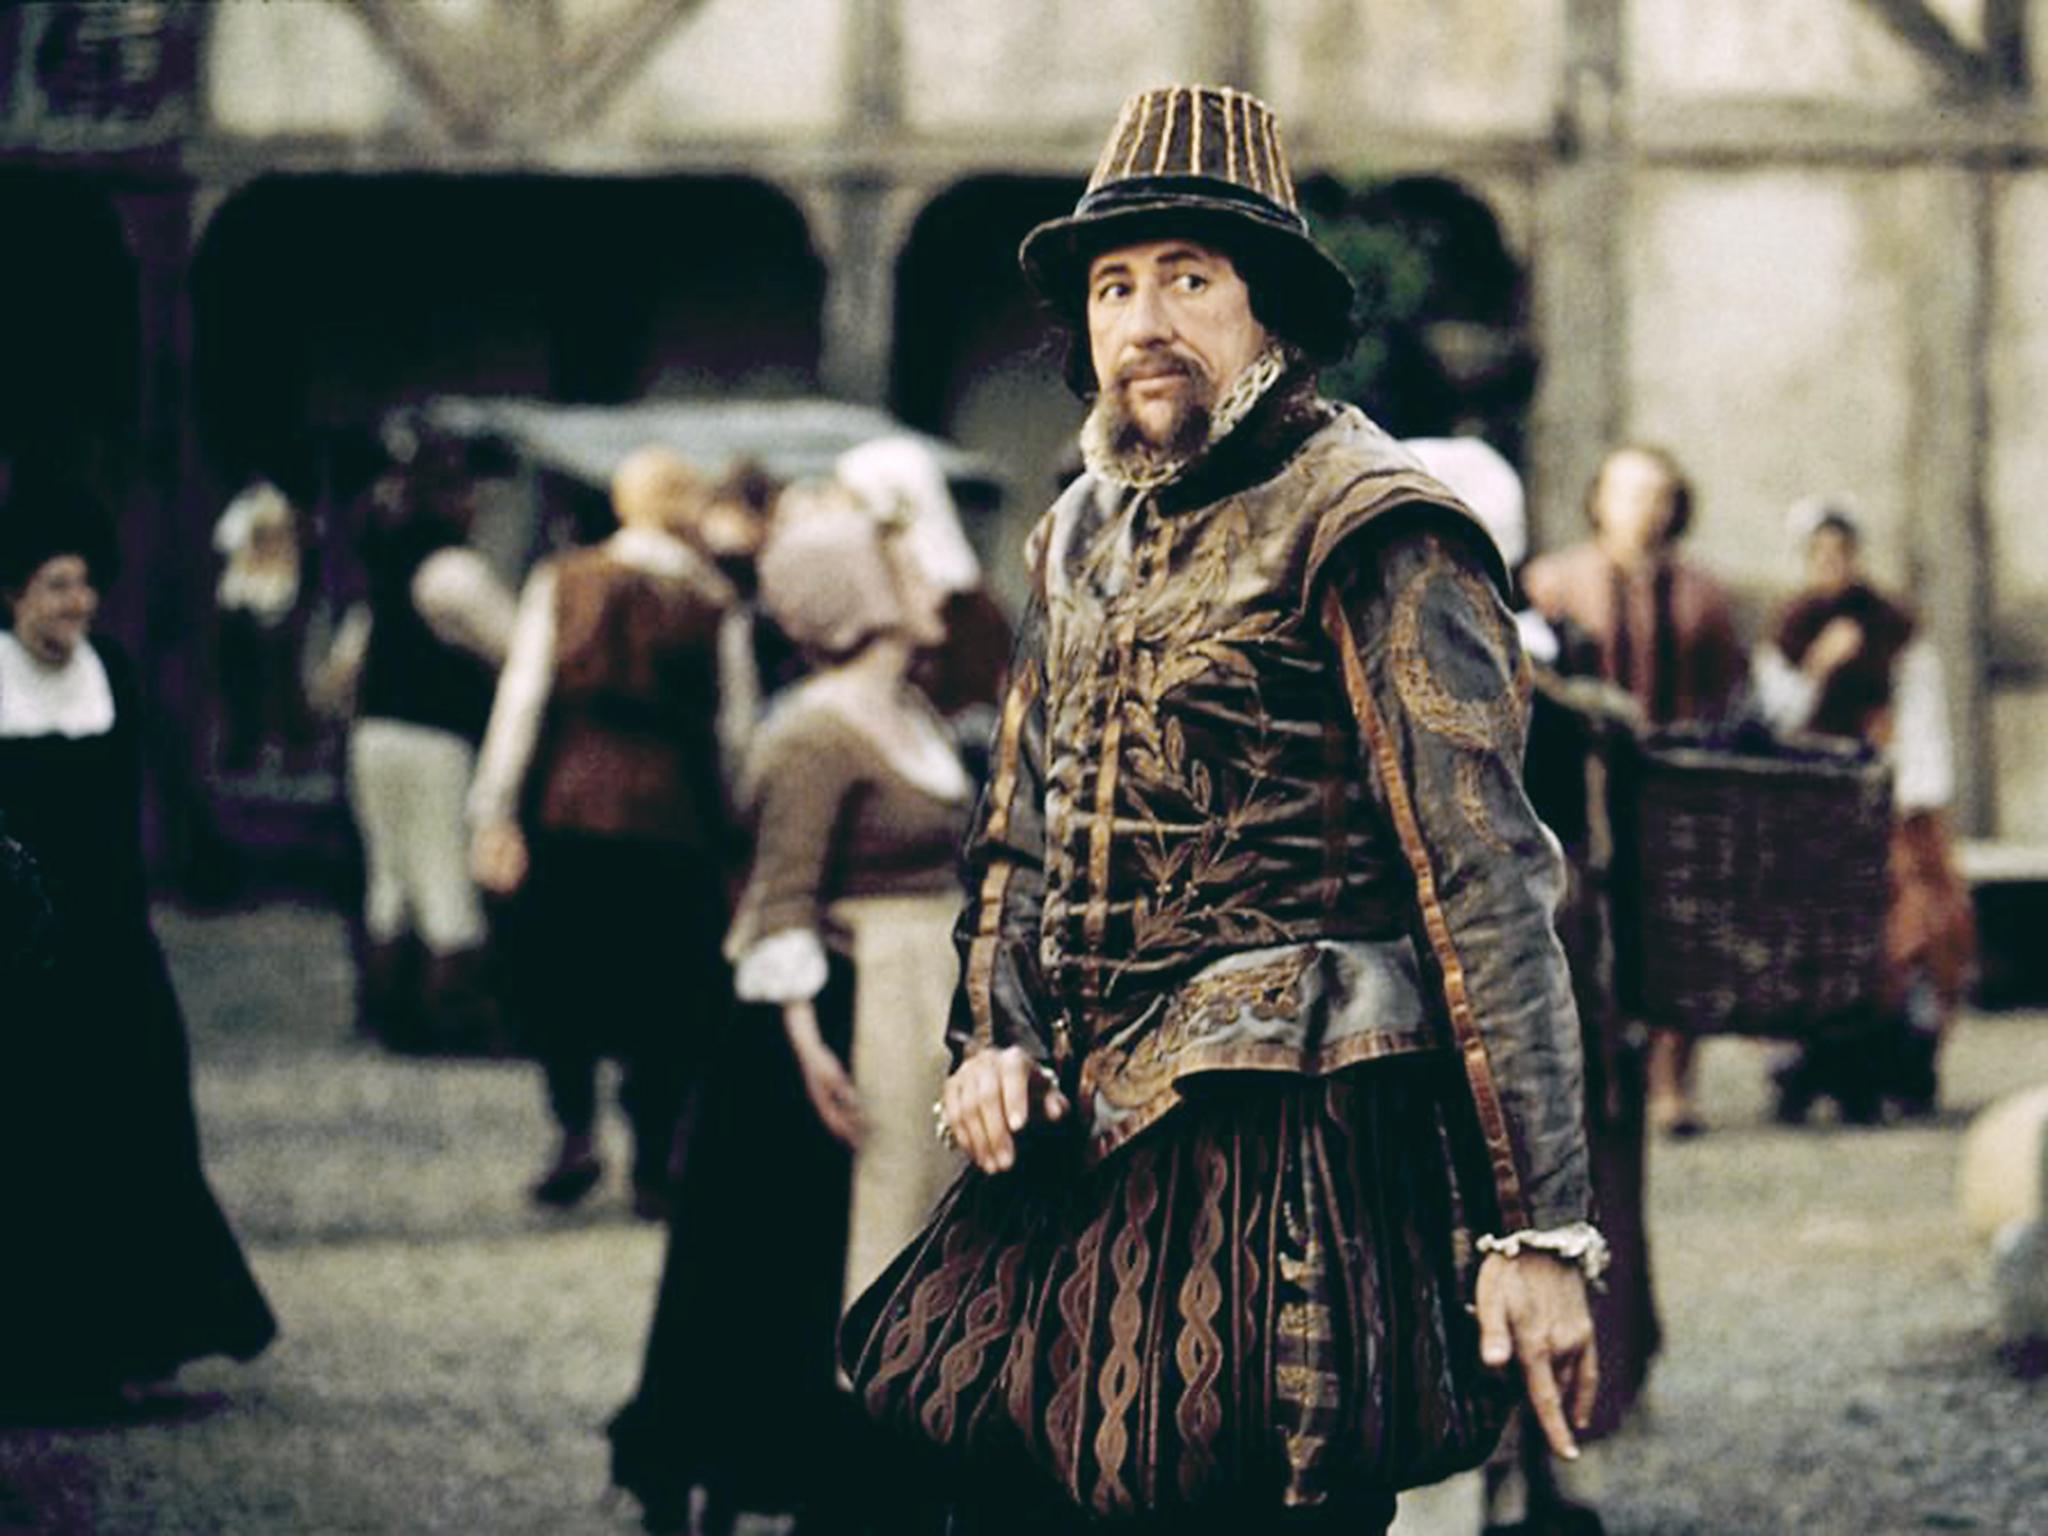 The actor played Philip Henslowe in the 1998 romantic comedy 'Shakespeare in Love'